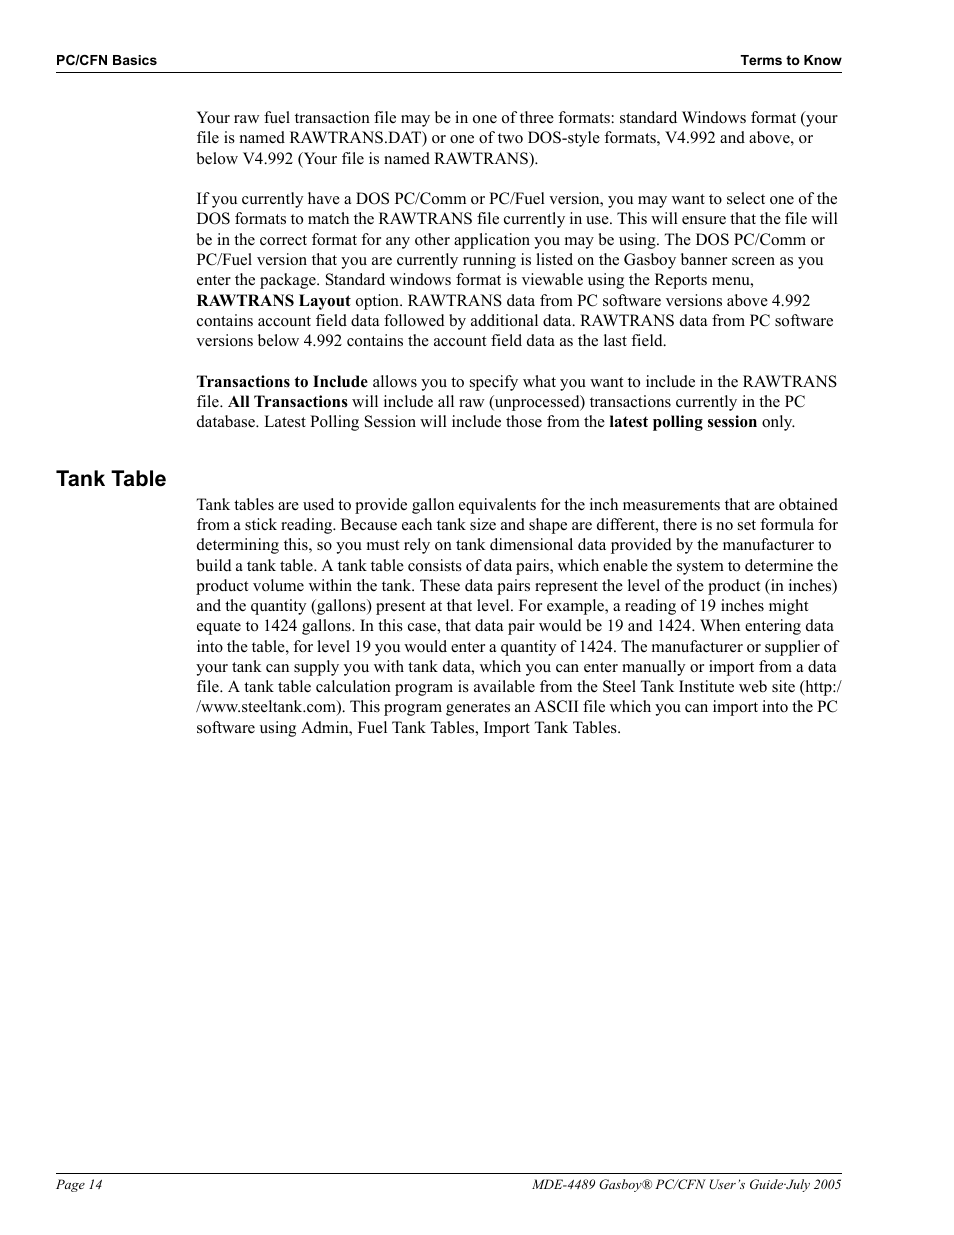 Tank table, Tank table -14 | Gasboy PC CFN site controller User Manual | Page 18 / 30